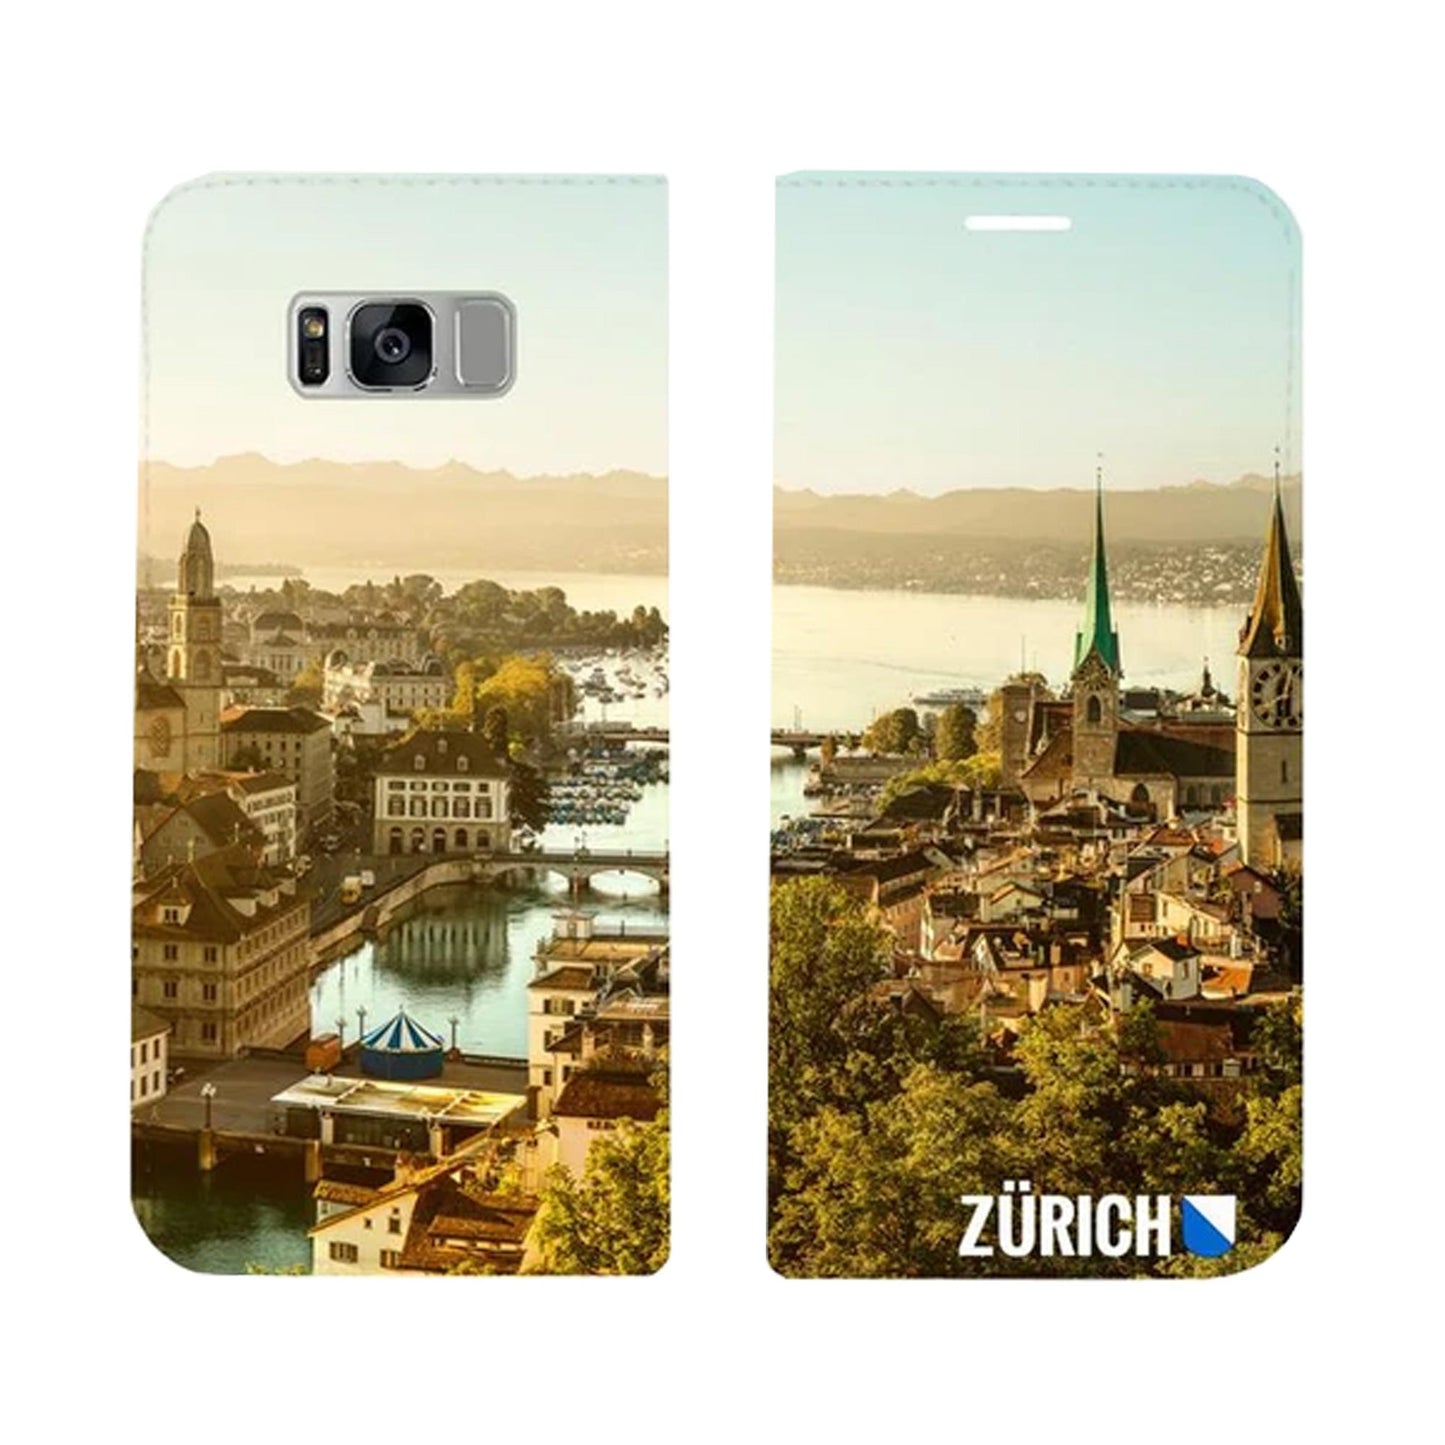 Zurich City from Above Panorama Case for Samsung Galaxy S8